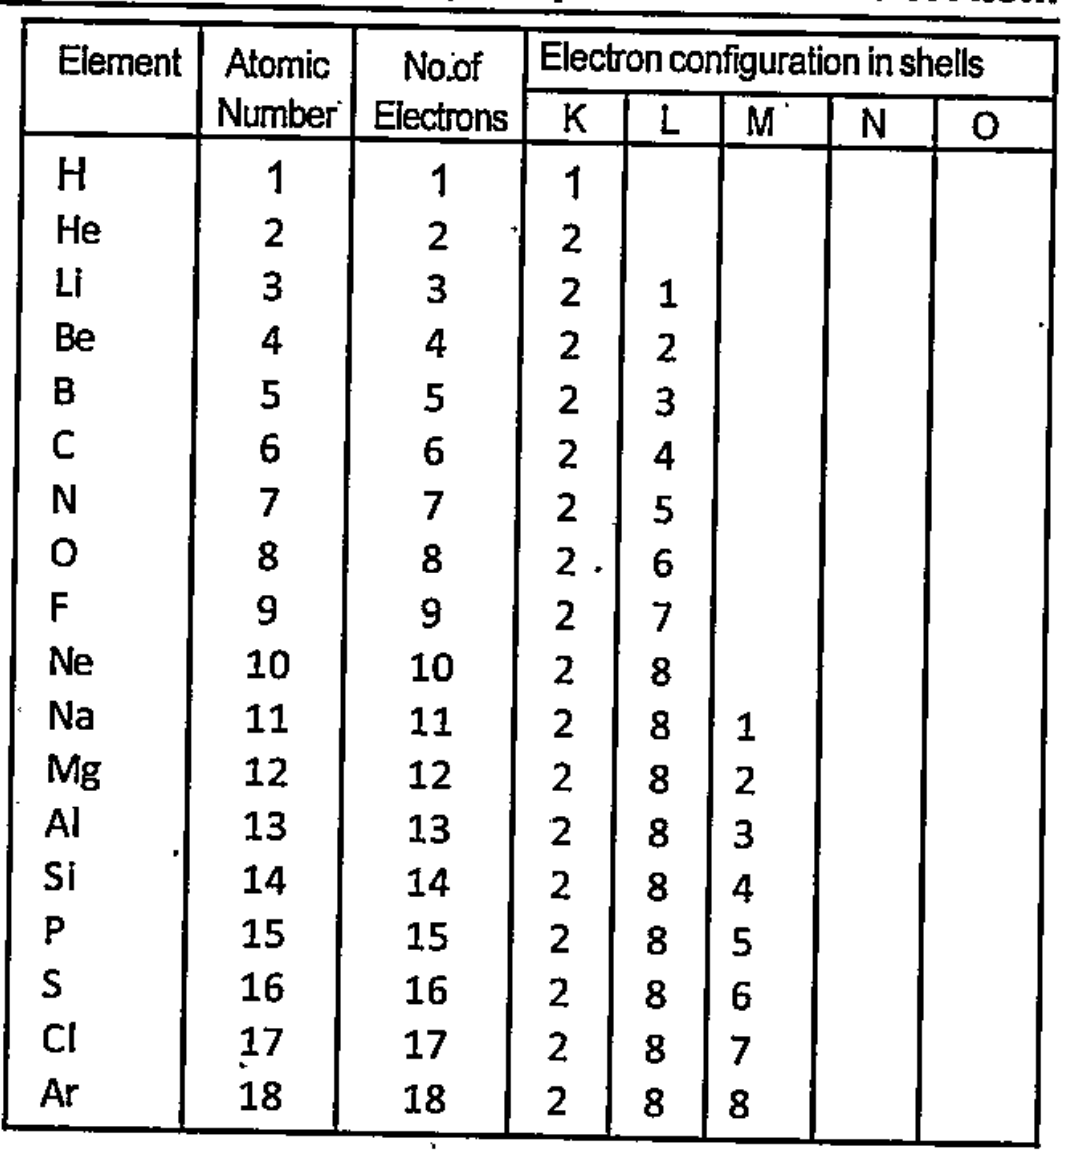 Analyse the electronic configuration of atoms of element 1-18 in the following table: